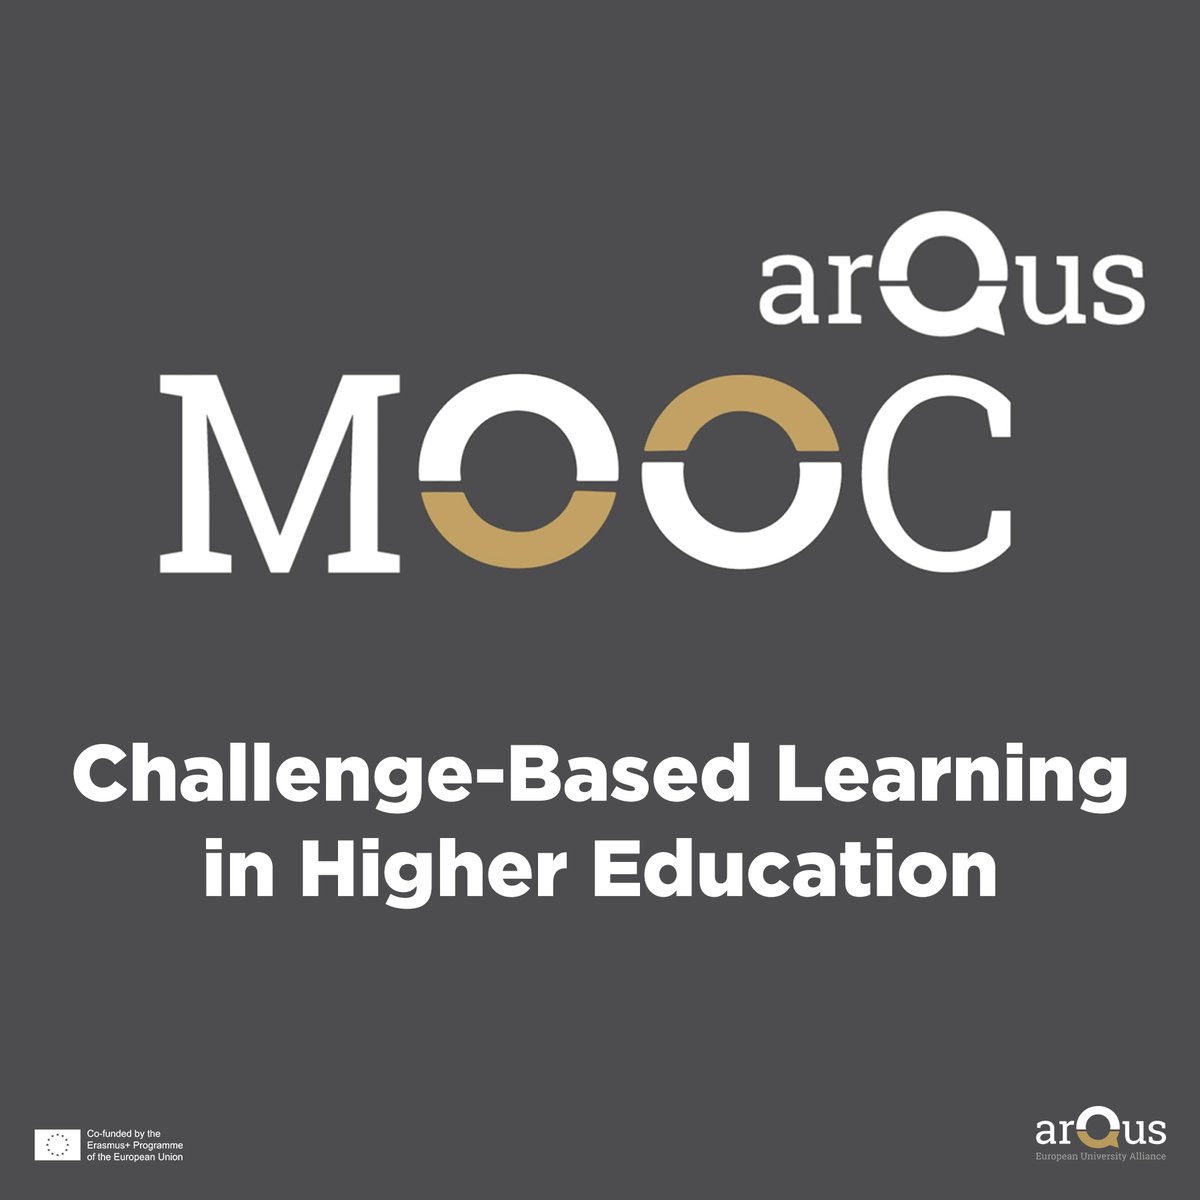 📢If you are an #ArqusTeacher, you have the opportunity to participate in the new #ArqusMOOC on #ChallengeBasedLearning in #HigherEd and update your skills with the latest developments in #LearningMethods. 
📆The course starts on 13 June‼️
👉Enrol here: arqus-alliance.eu/news/arqus-moo…